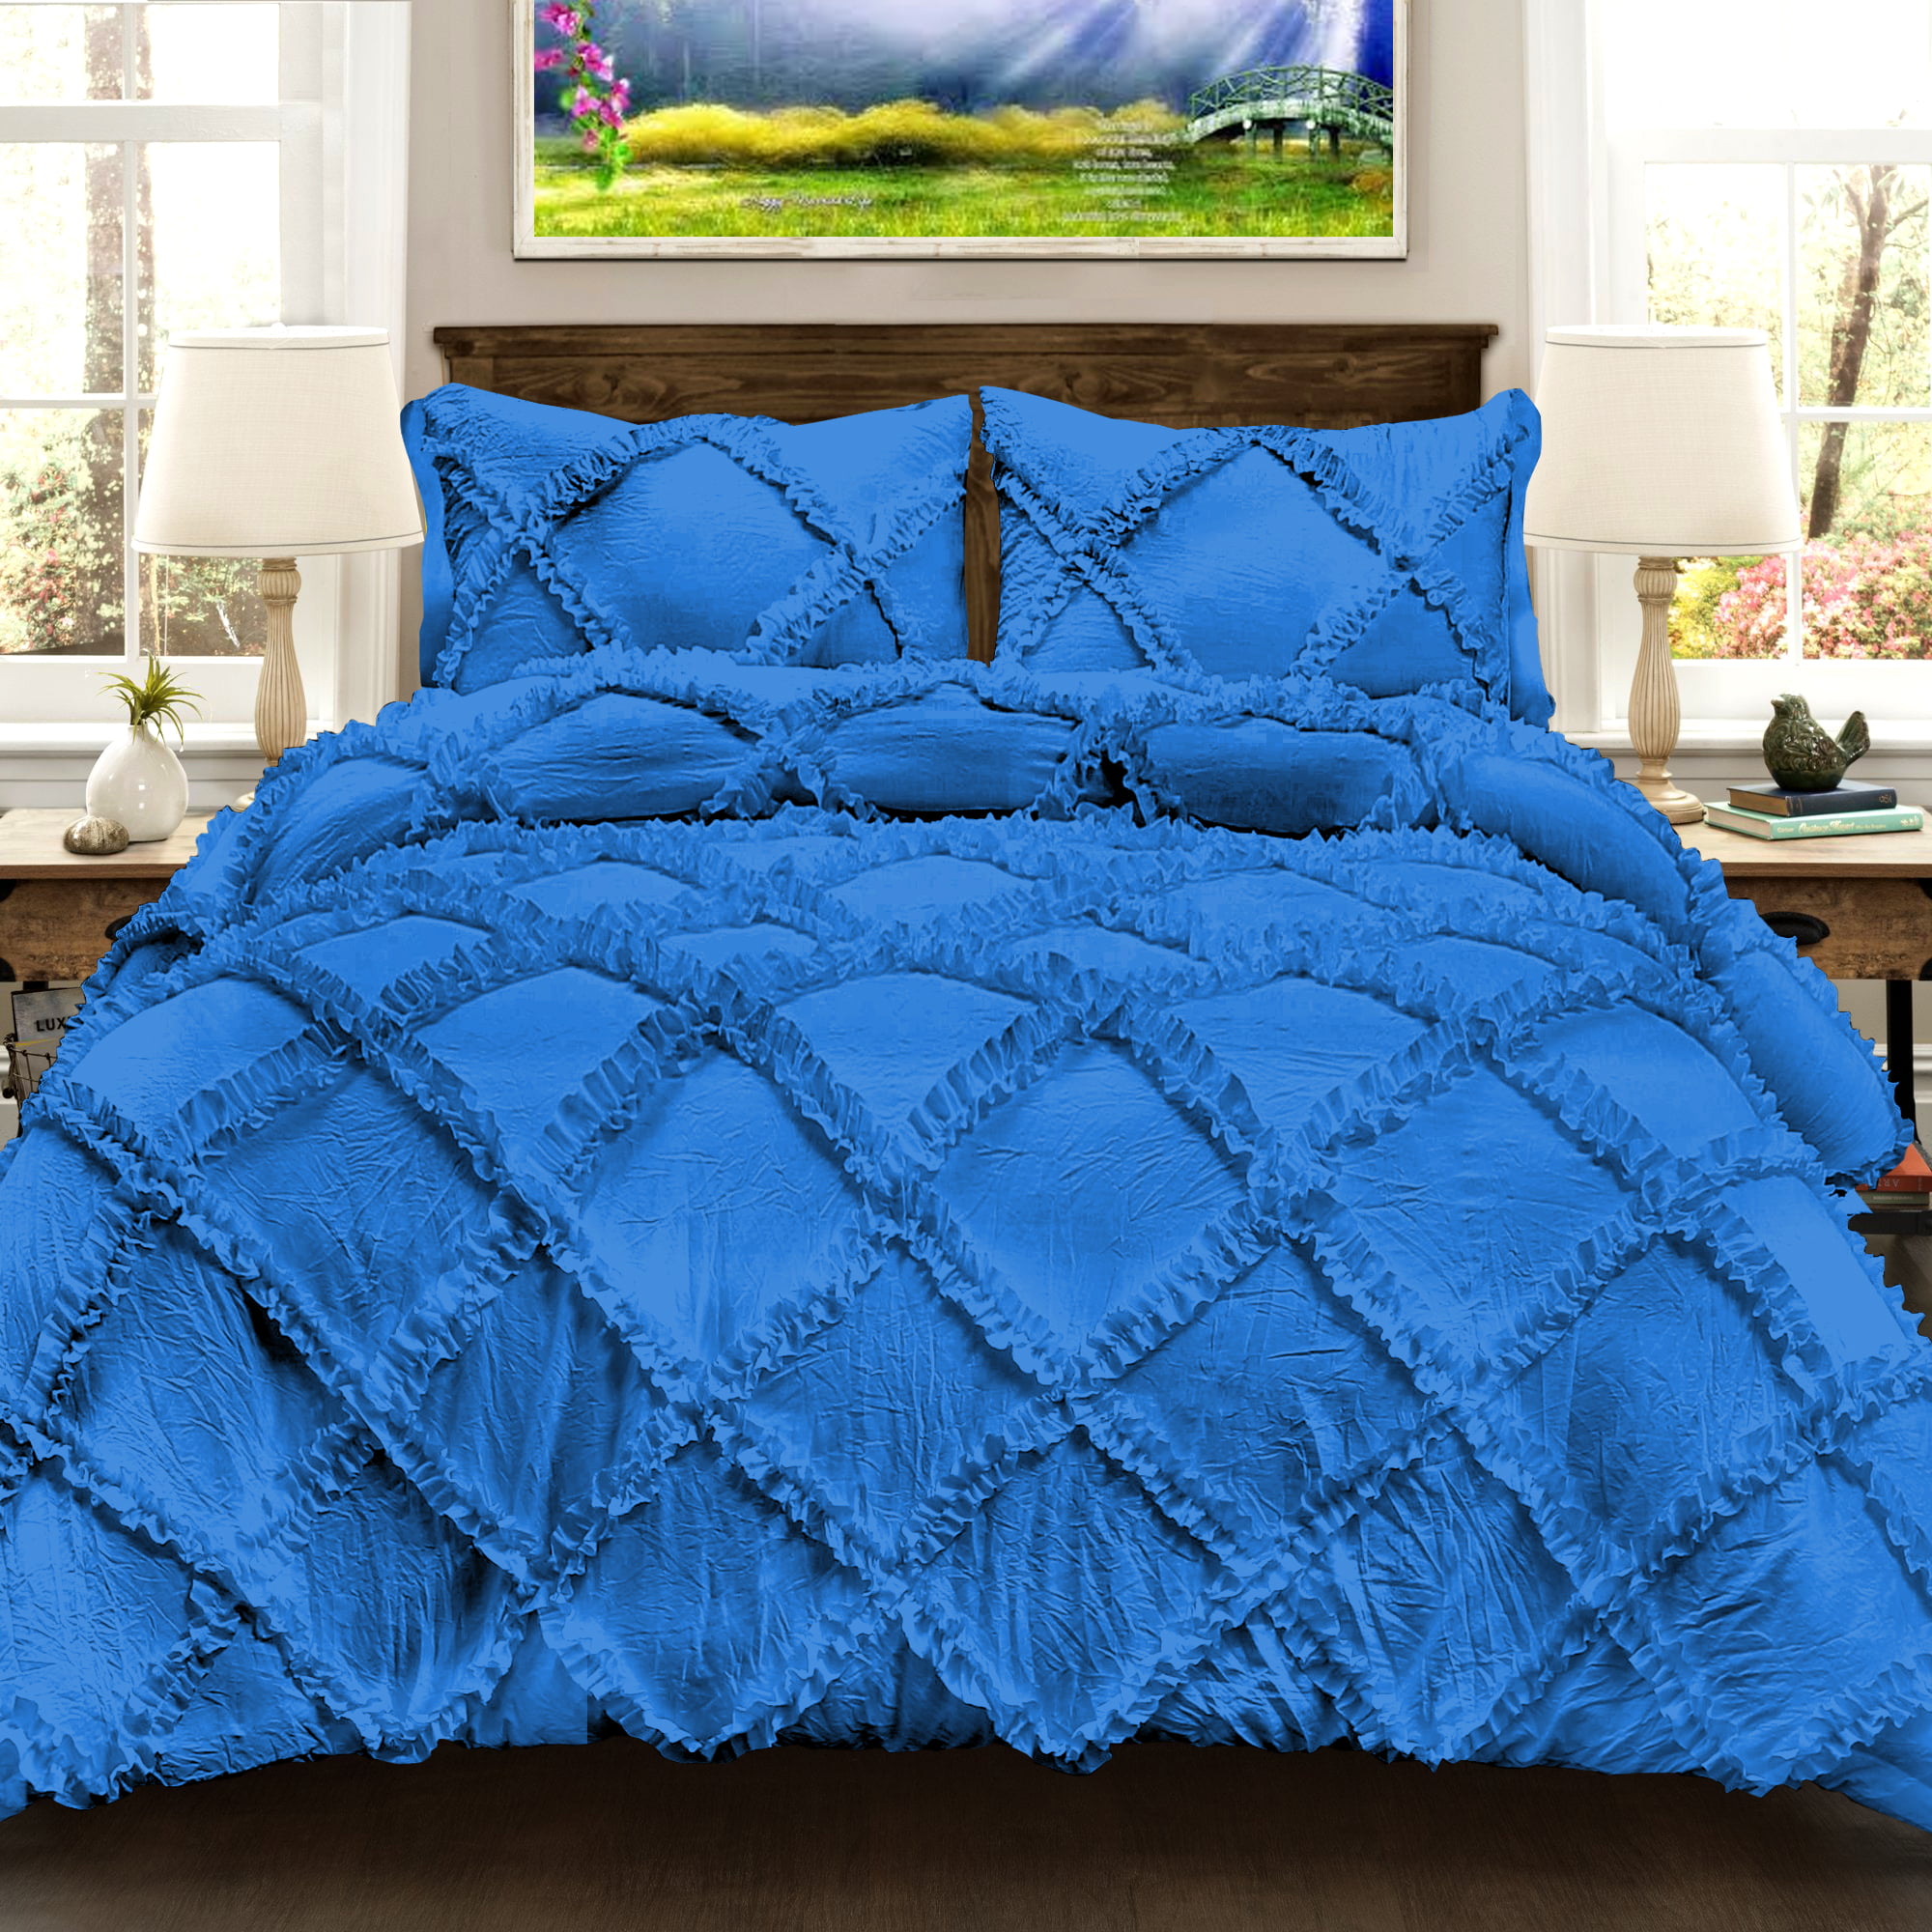 Katy 3 Piece Mini Ruffle Comforter Set Bed Cover New Arrival All Size Royal Blue 